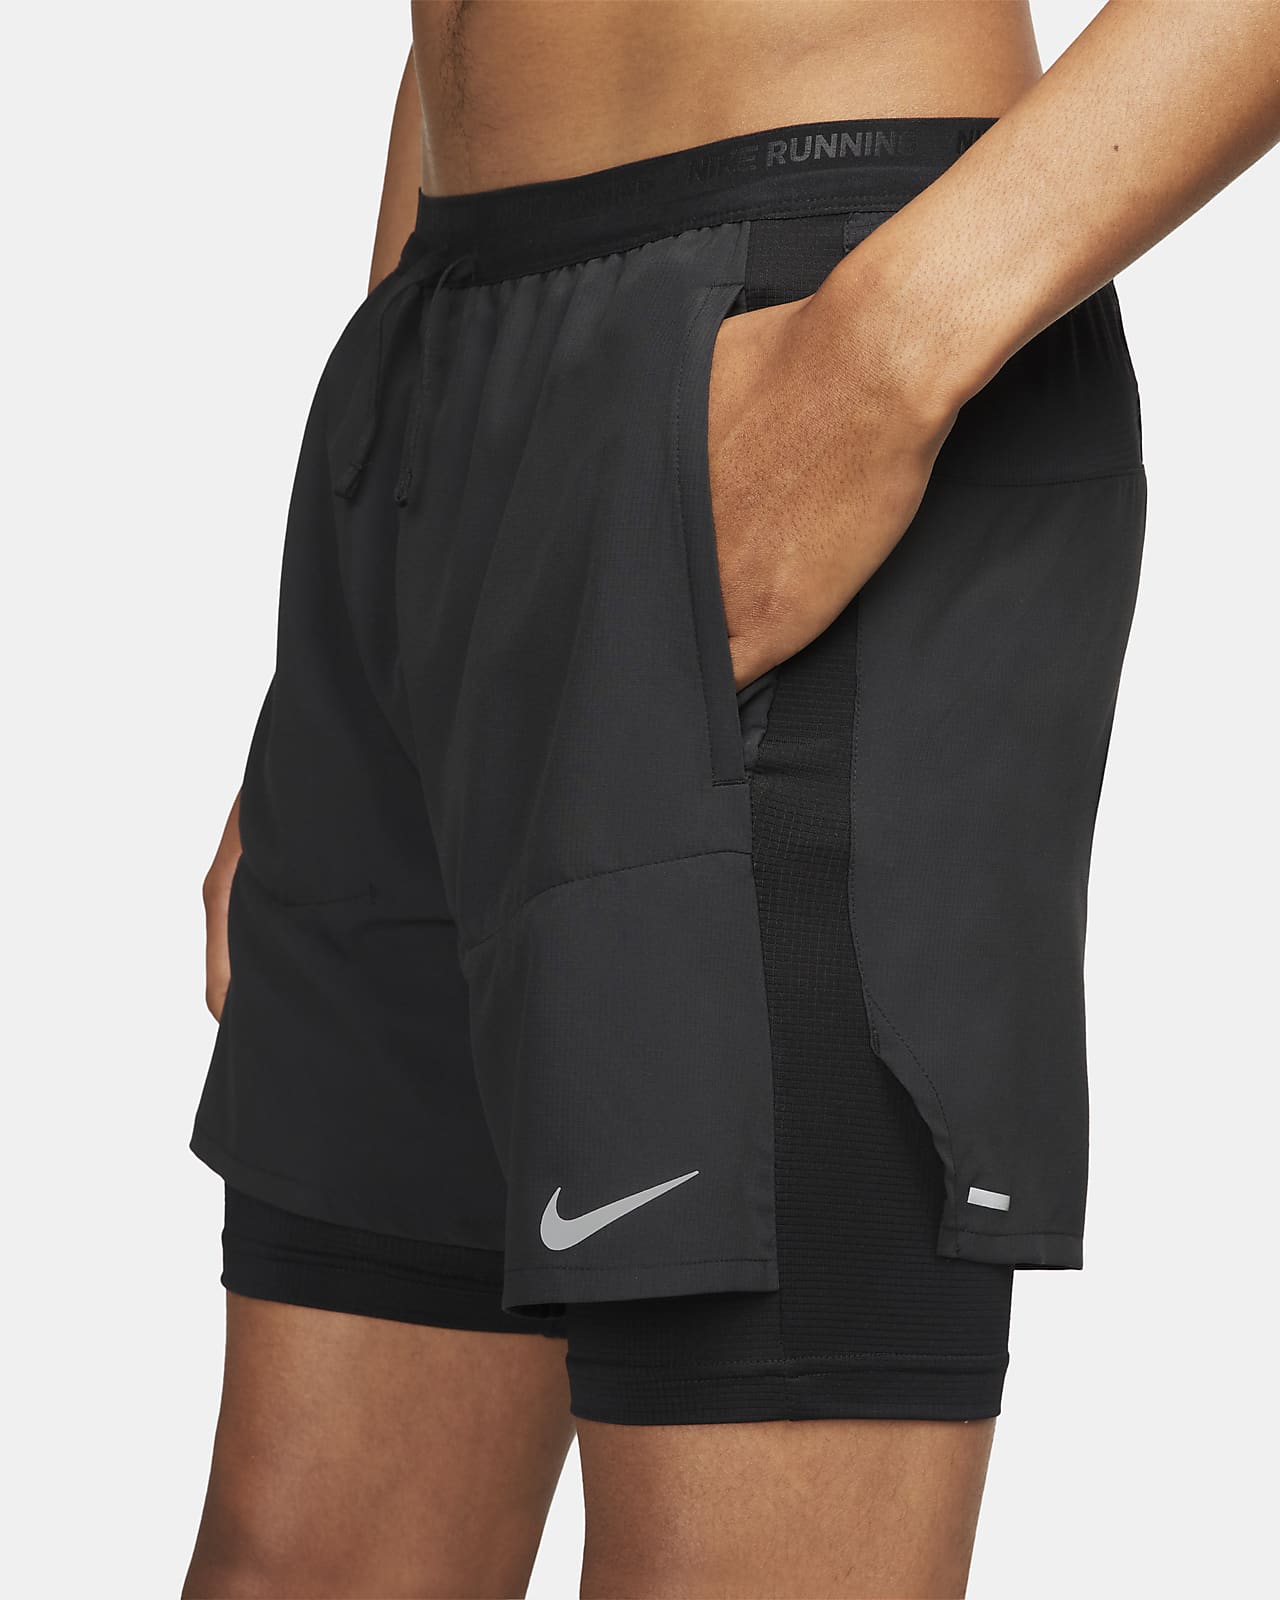 Athletic Compression Shorts (Black) – We Ball Sports